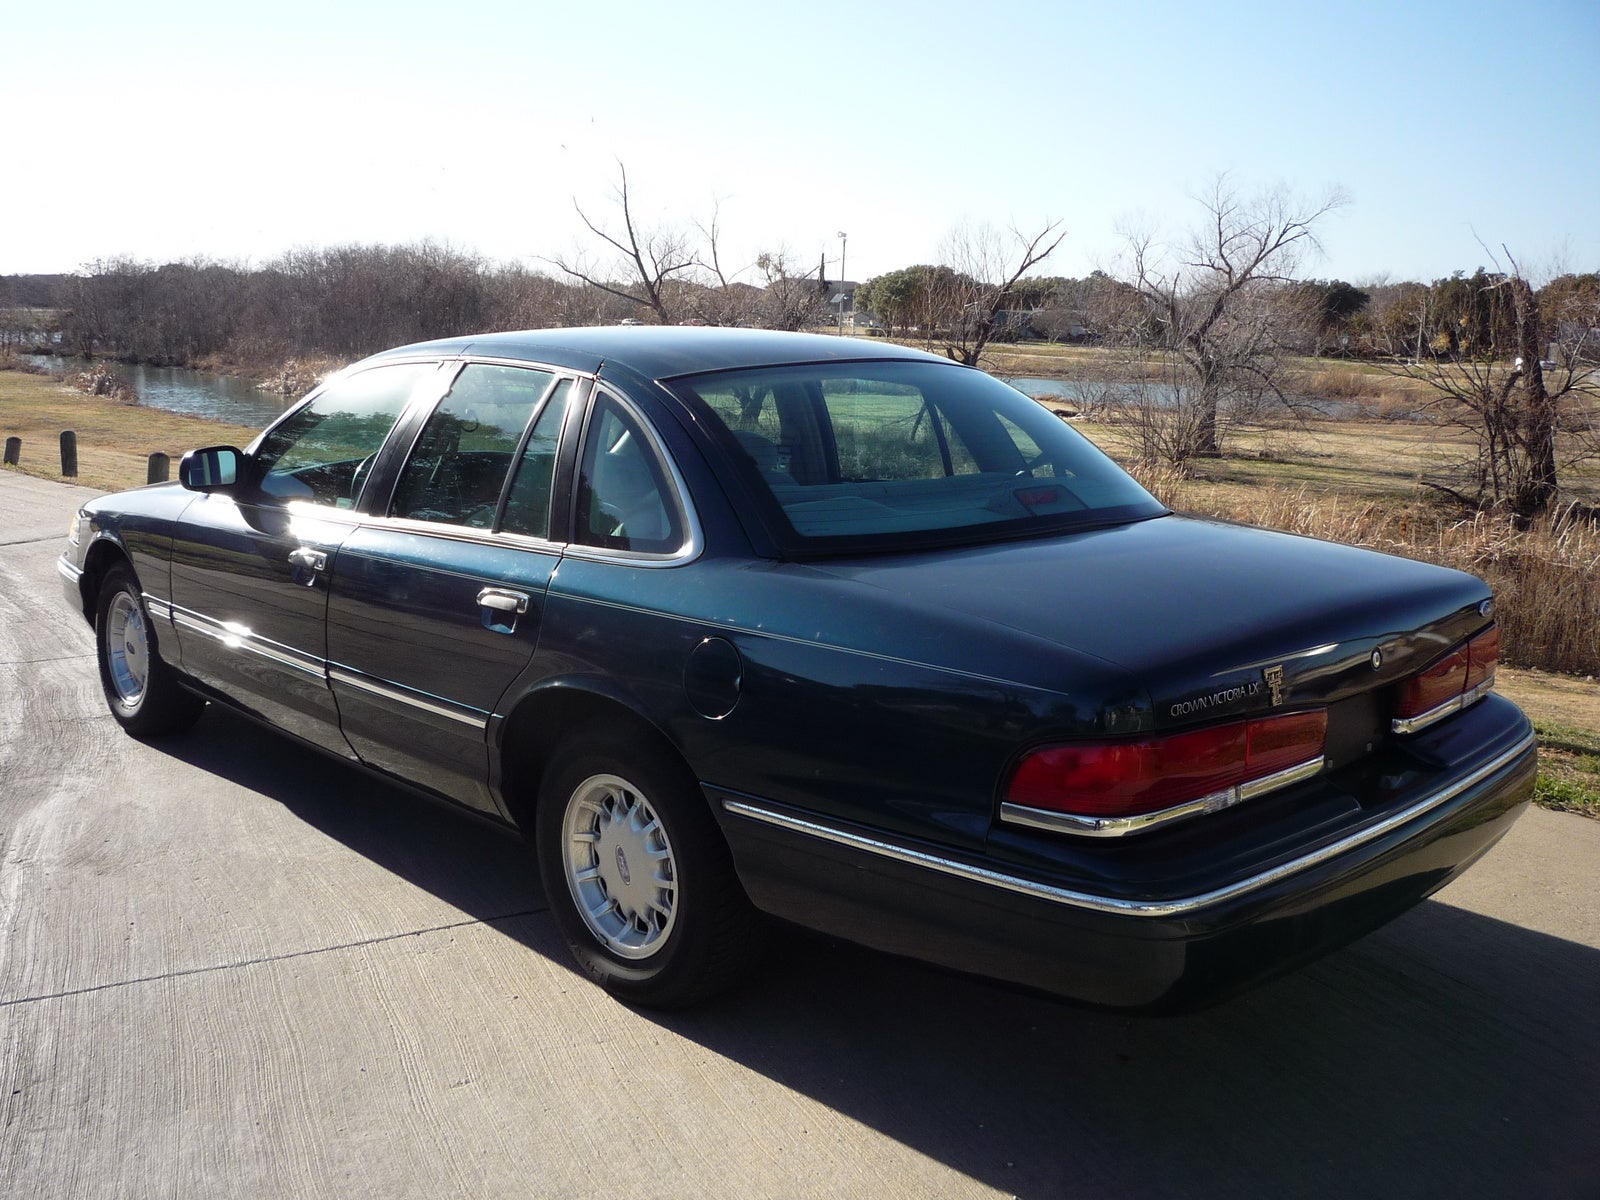 1997 Crown ford lx victoria #7